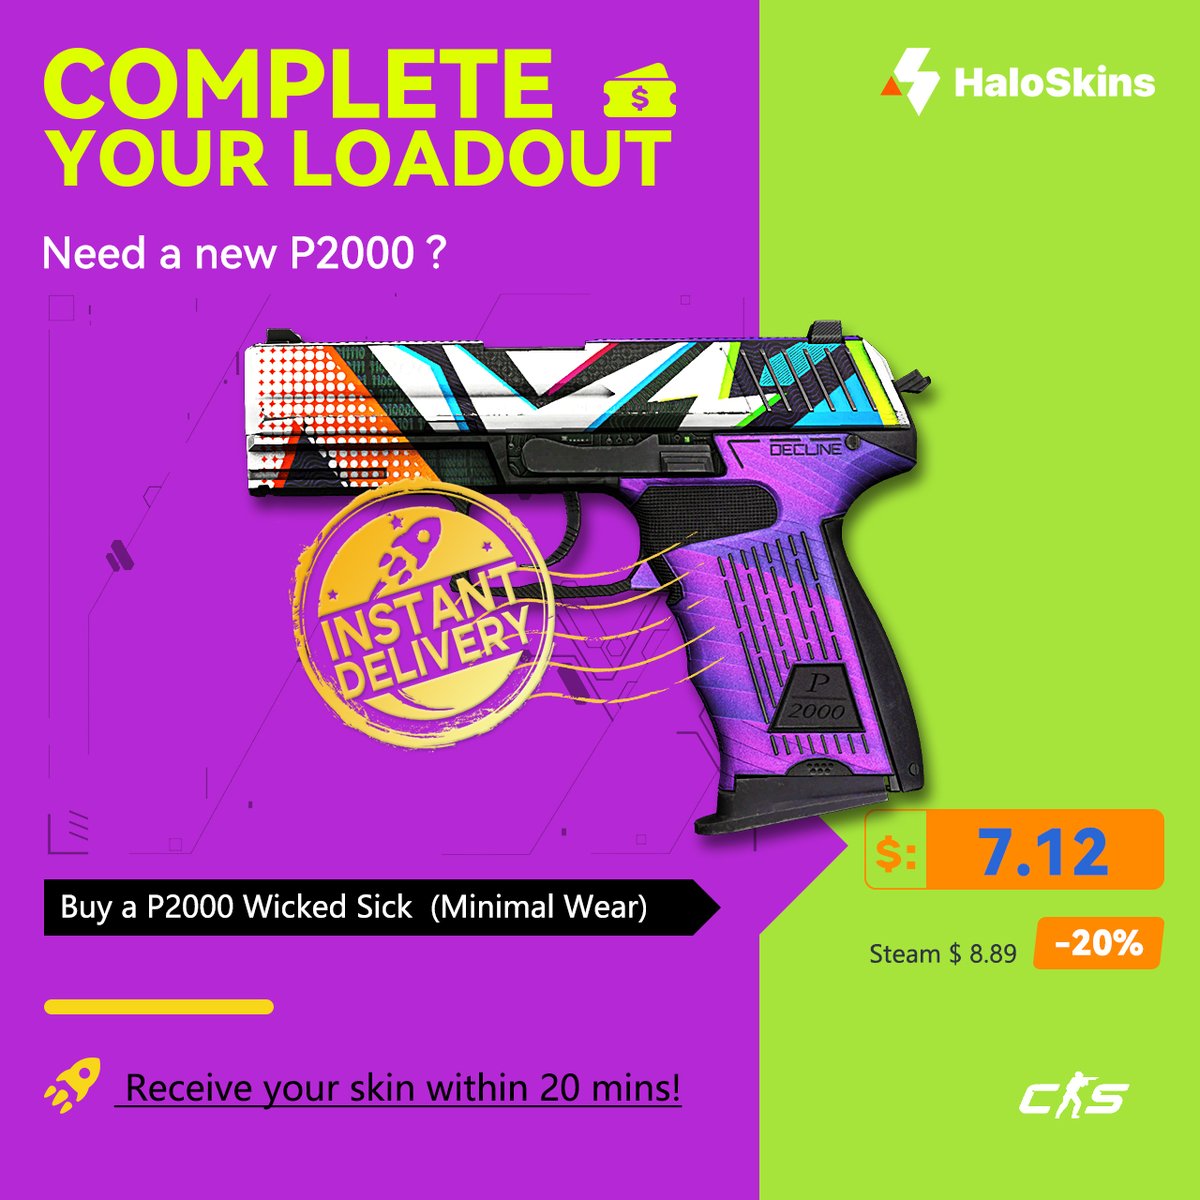 🔫🤑 Get your hands on the P2000 Wicked Sick (MW)  skin at an unbeatable discount of 20% compared to Steam prices! 

💰 Don't hesitate any longer! Check out the price now and prepare to be tempted. 😱💸
#CSGO #DiscountAlert #MustHave #GetItNow #Steam #CS2 #HaloSkins 

Sign Up